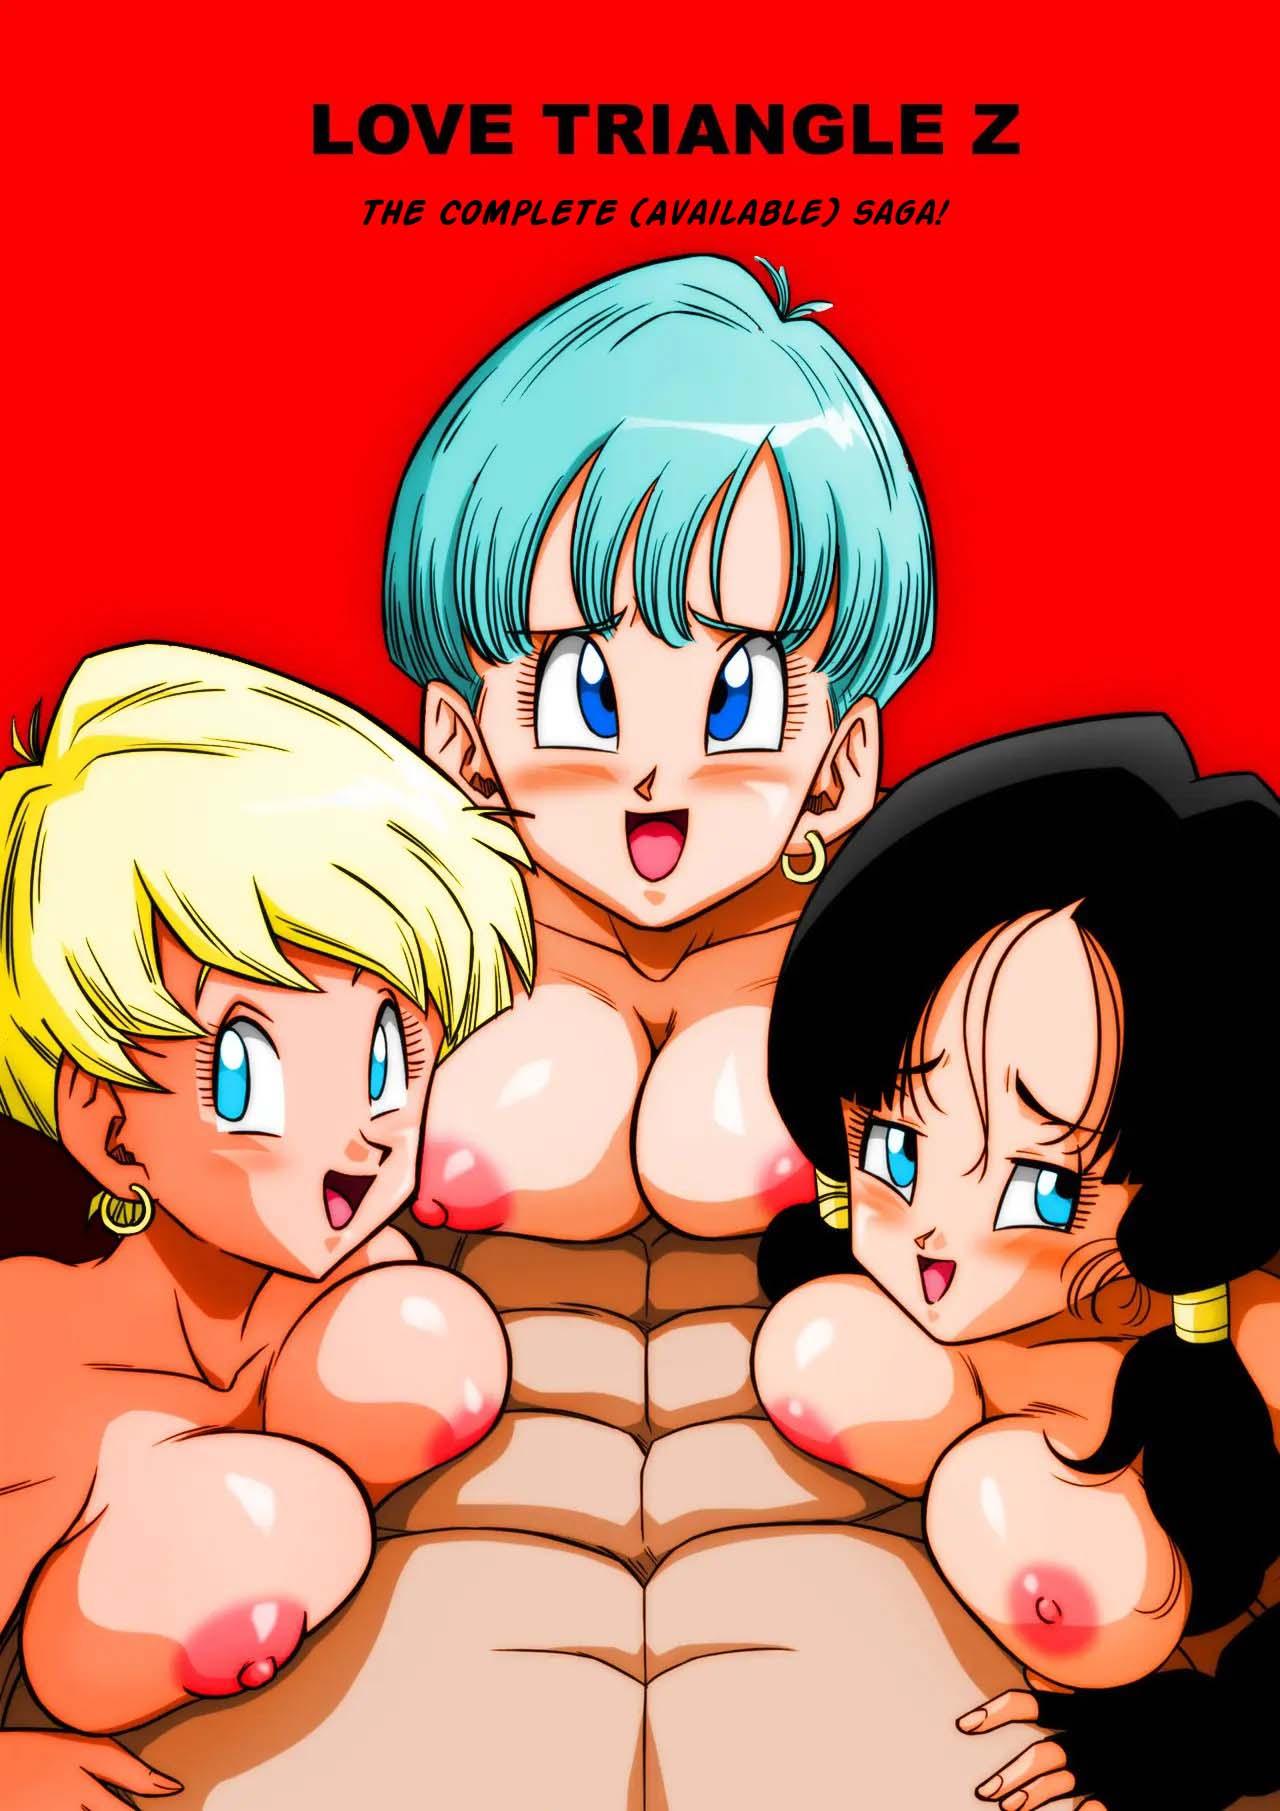 Cheat LOVE TRIANGLE Z Part 1-4 - Dragon ball z Gay Bang - Picture 1